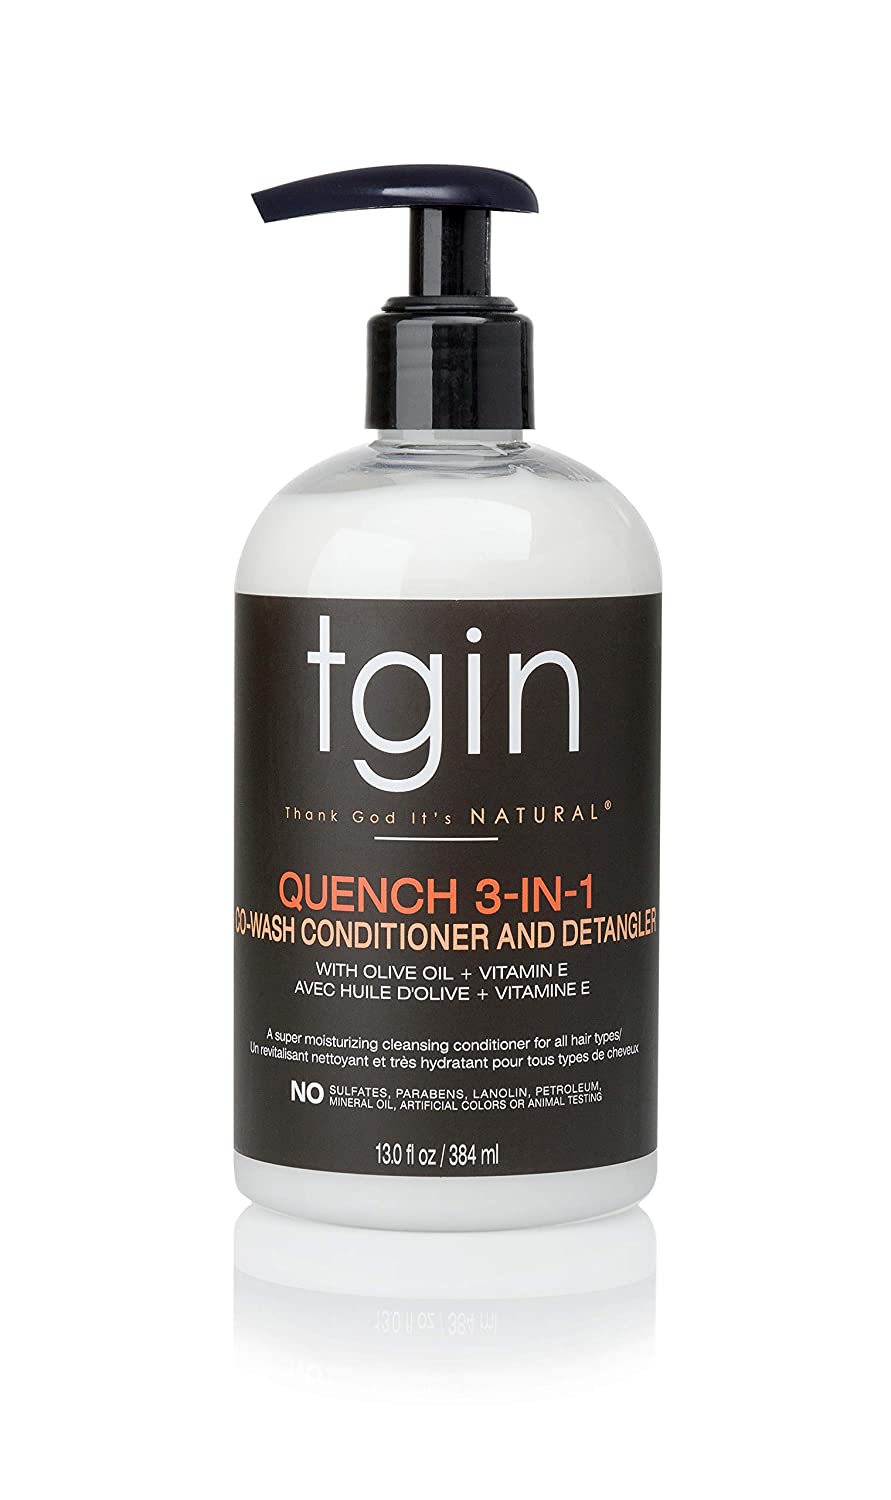 tgin Quench 3-in-1 Co-Wash Conditioner and Detangler [...]